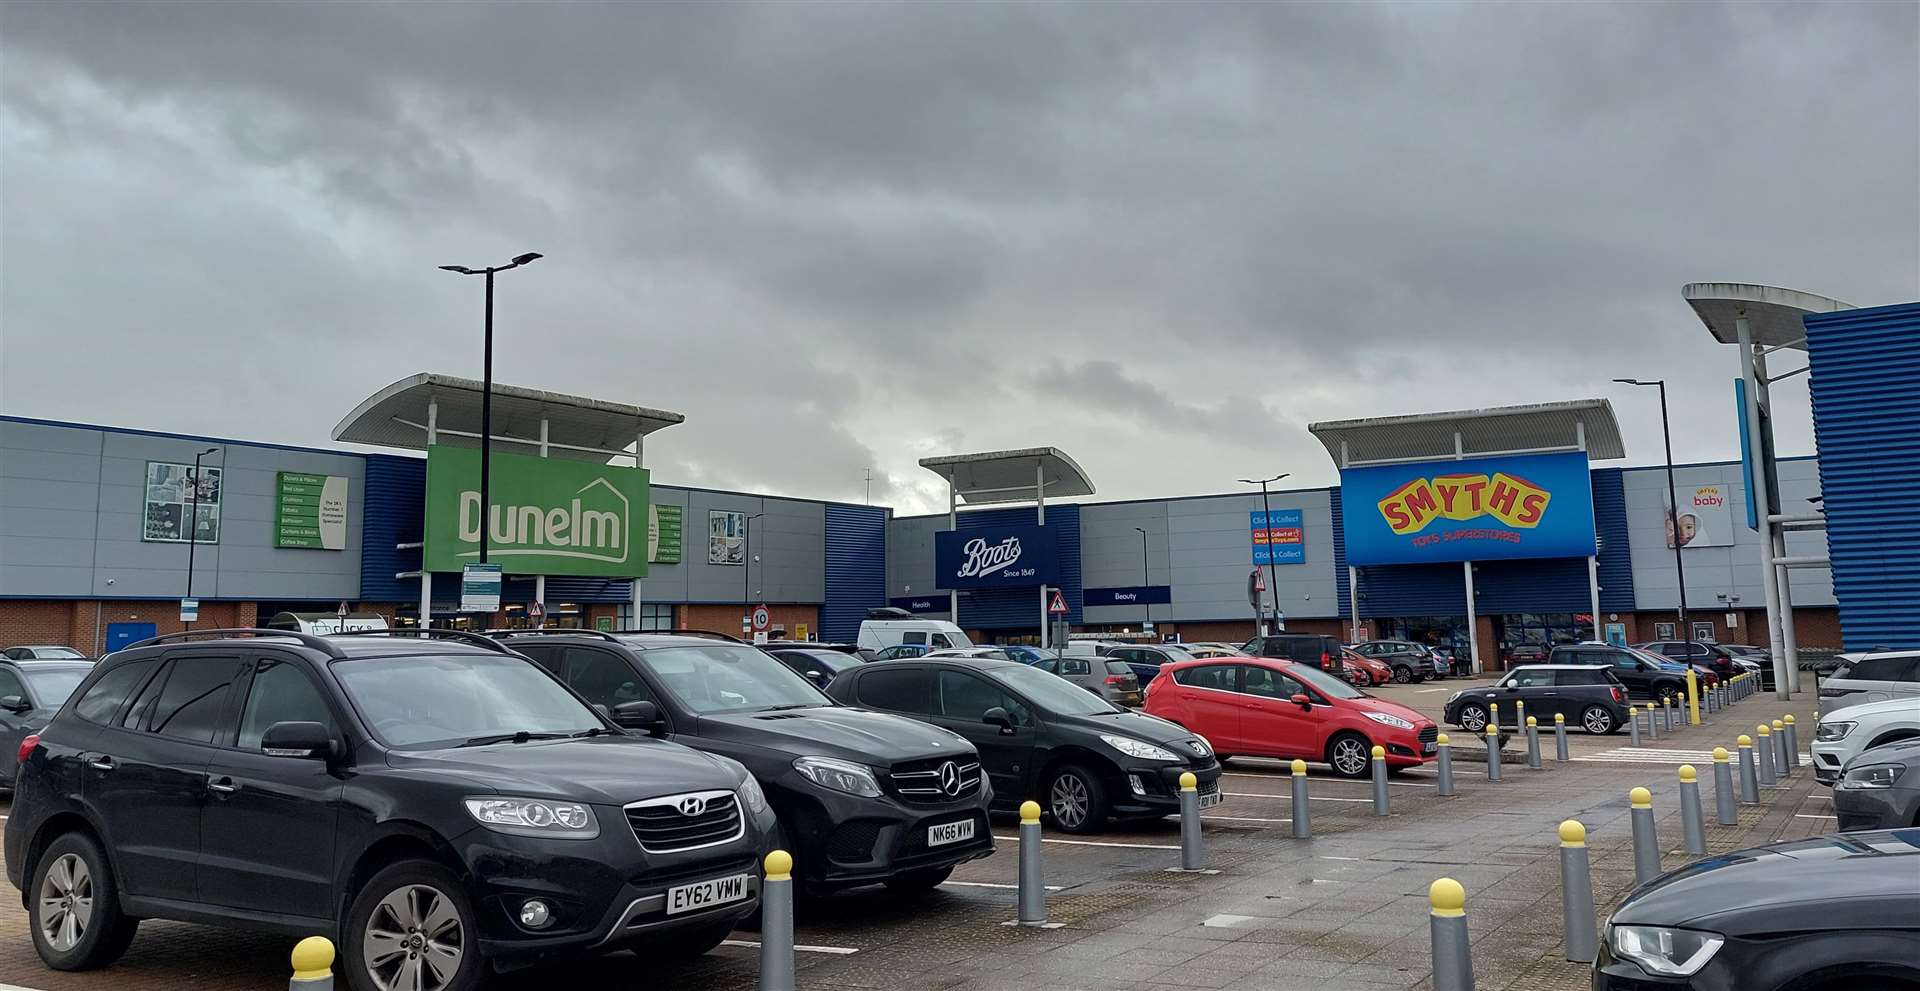 The Sevington site is home to a number of big-name retailers, but Argos did close its store earlier this year